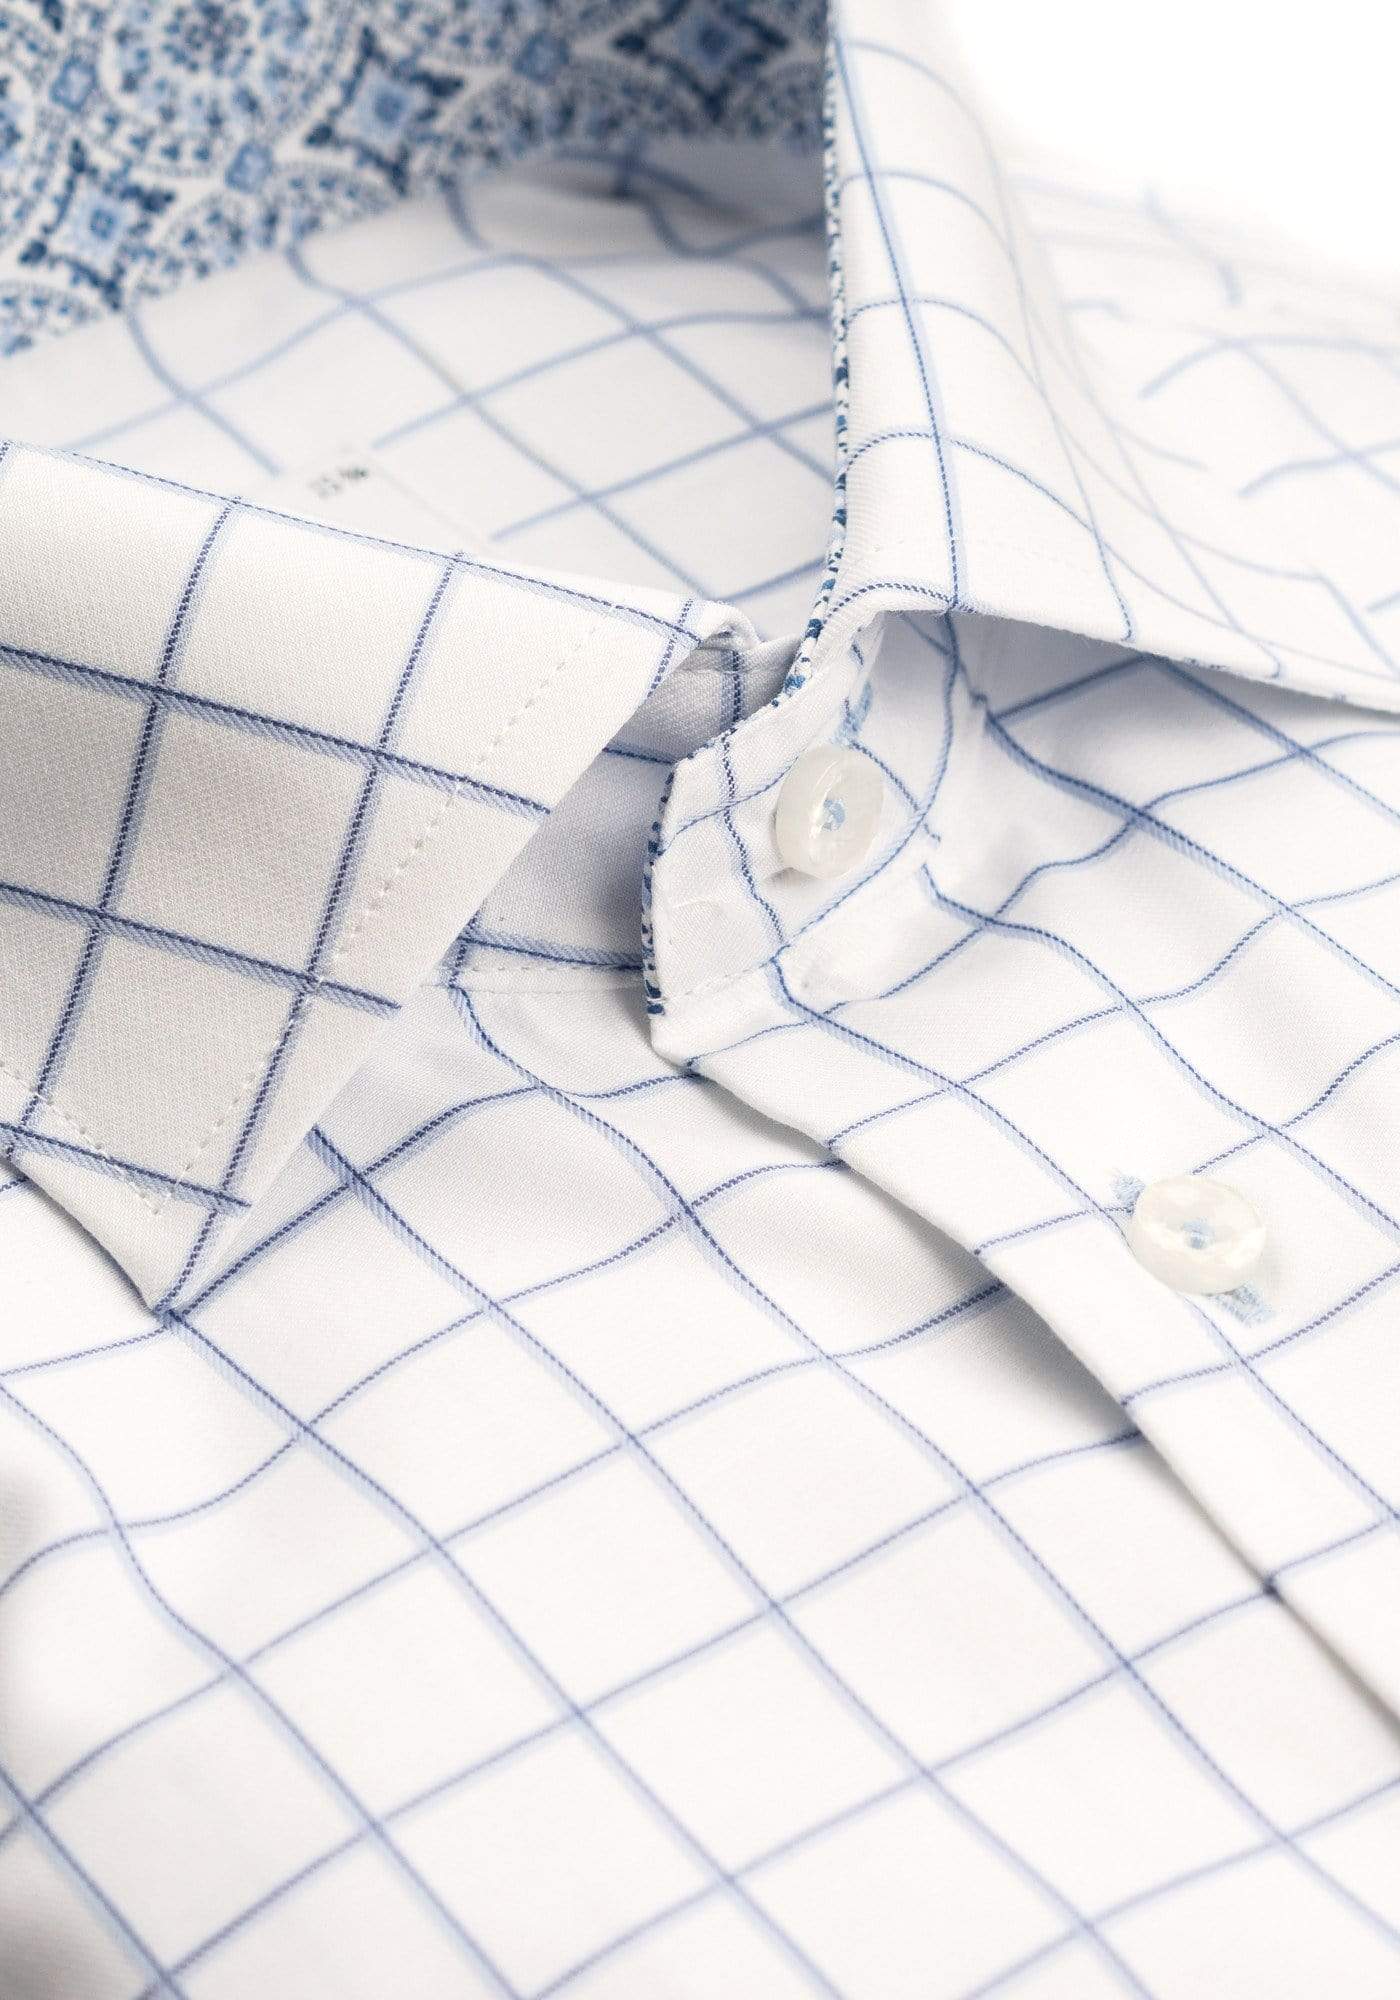 Oscar of Sweden Long Sleeve White Shirt With Blue Check by Oscar of Sweden